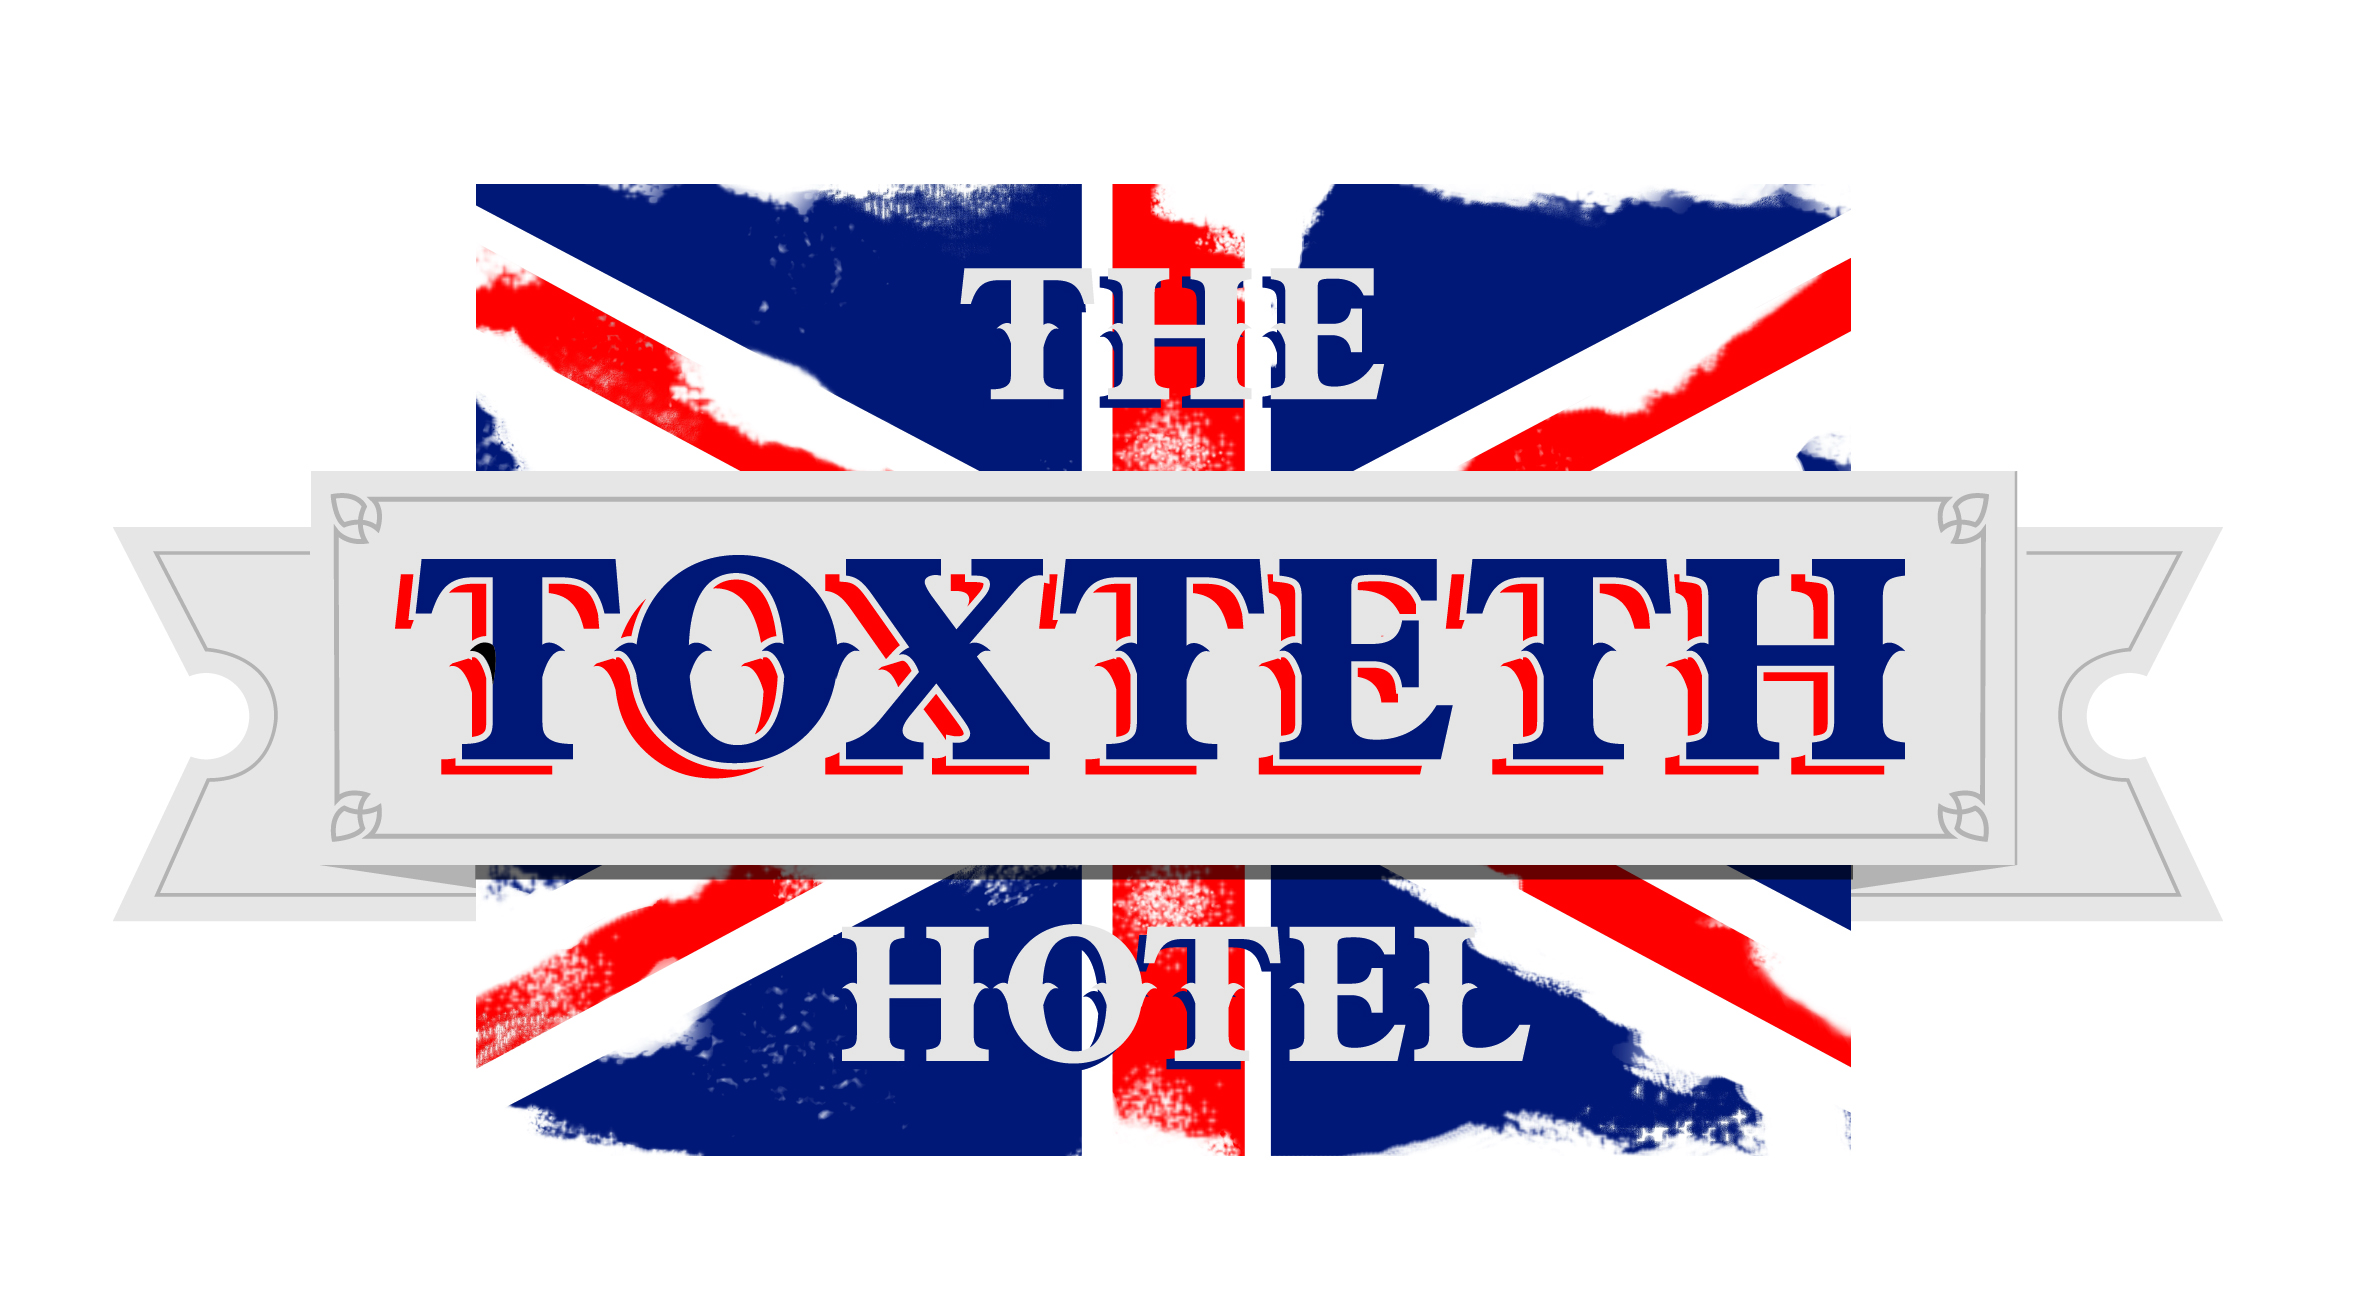 Toxteth Hotel